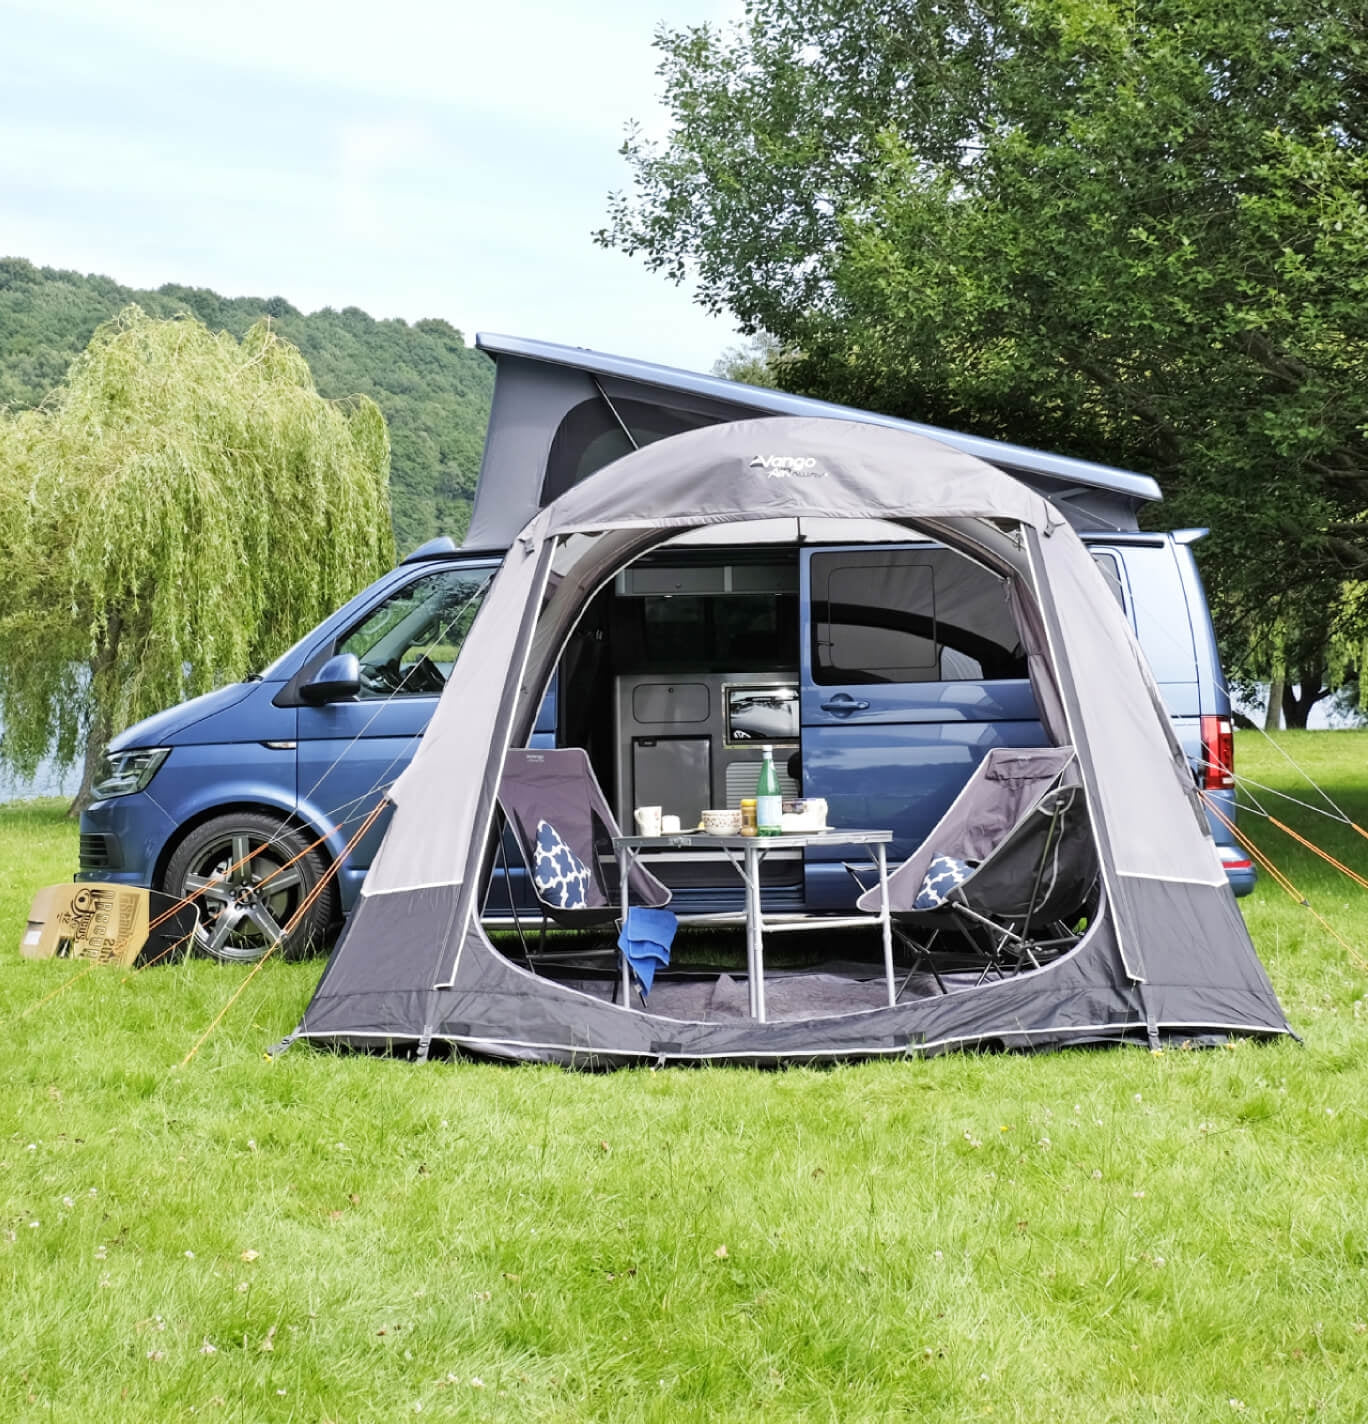 Forward facinf view of the Vango Kela pitched toa  vw with picnic, table & chairs set up